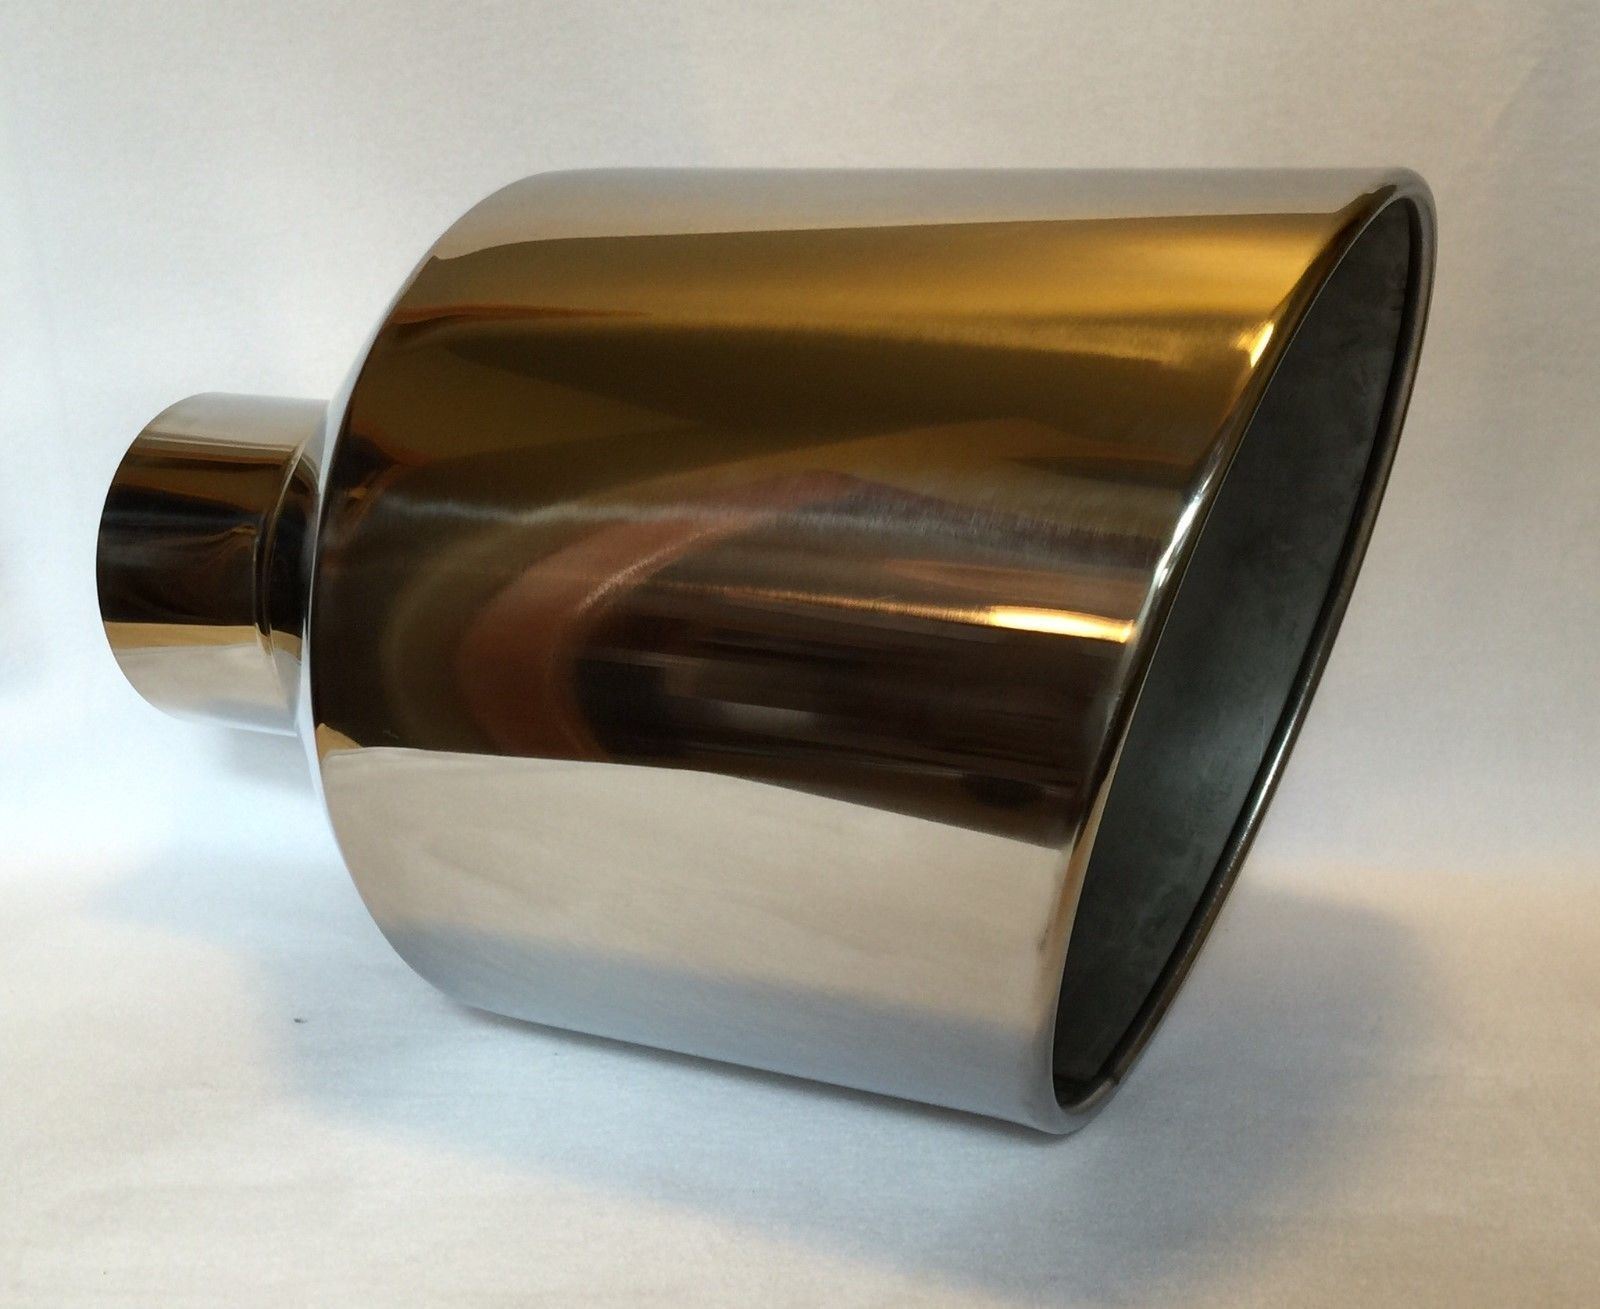 5” IN x 12” OUT x 18”L POLISHED STAINLESS DIESEL EXHAUST TIP FORD,CHEVY,DODGE